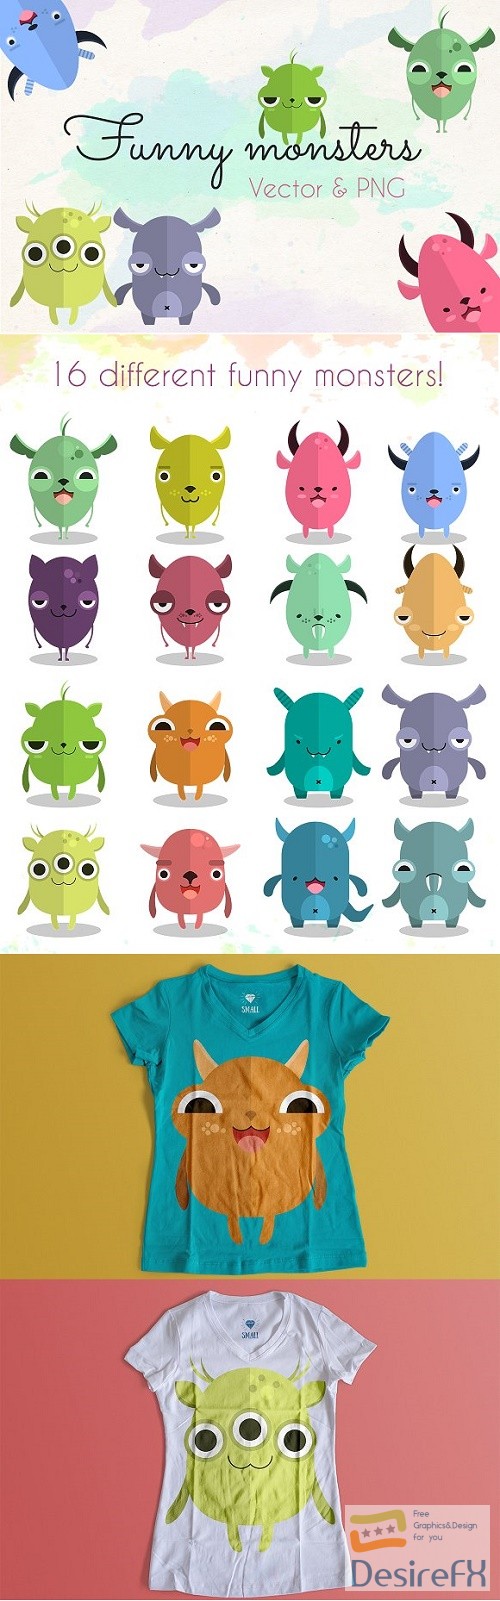 Funny monsters collection - 536219